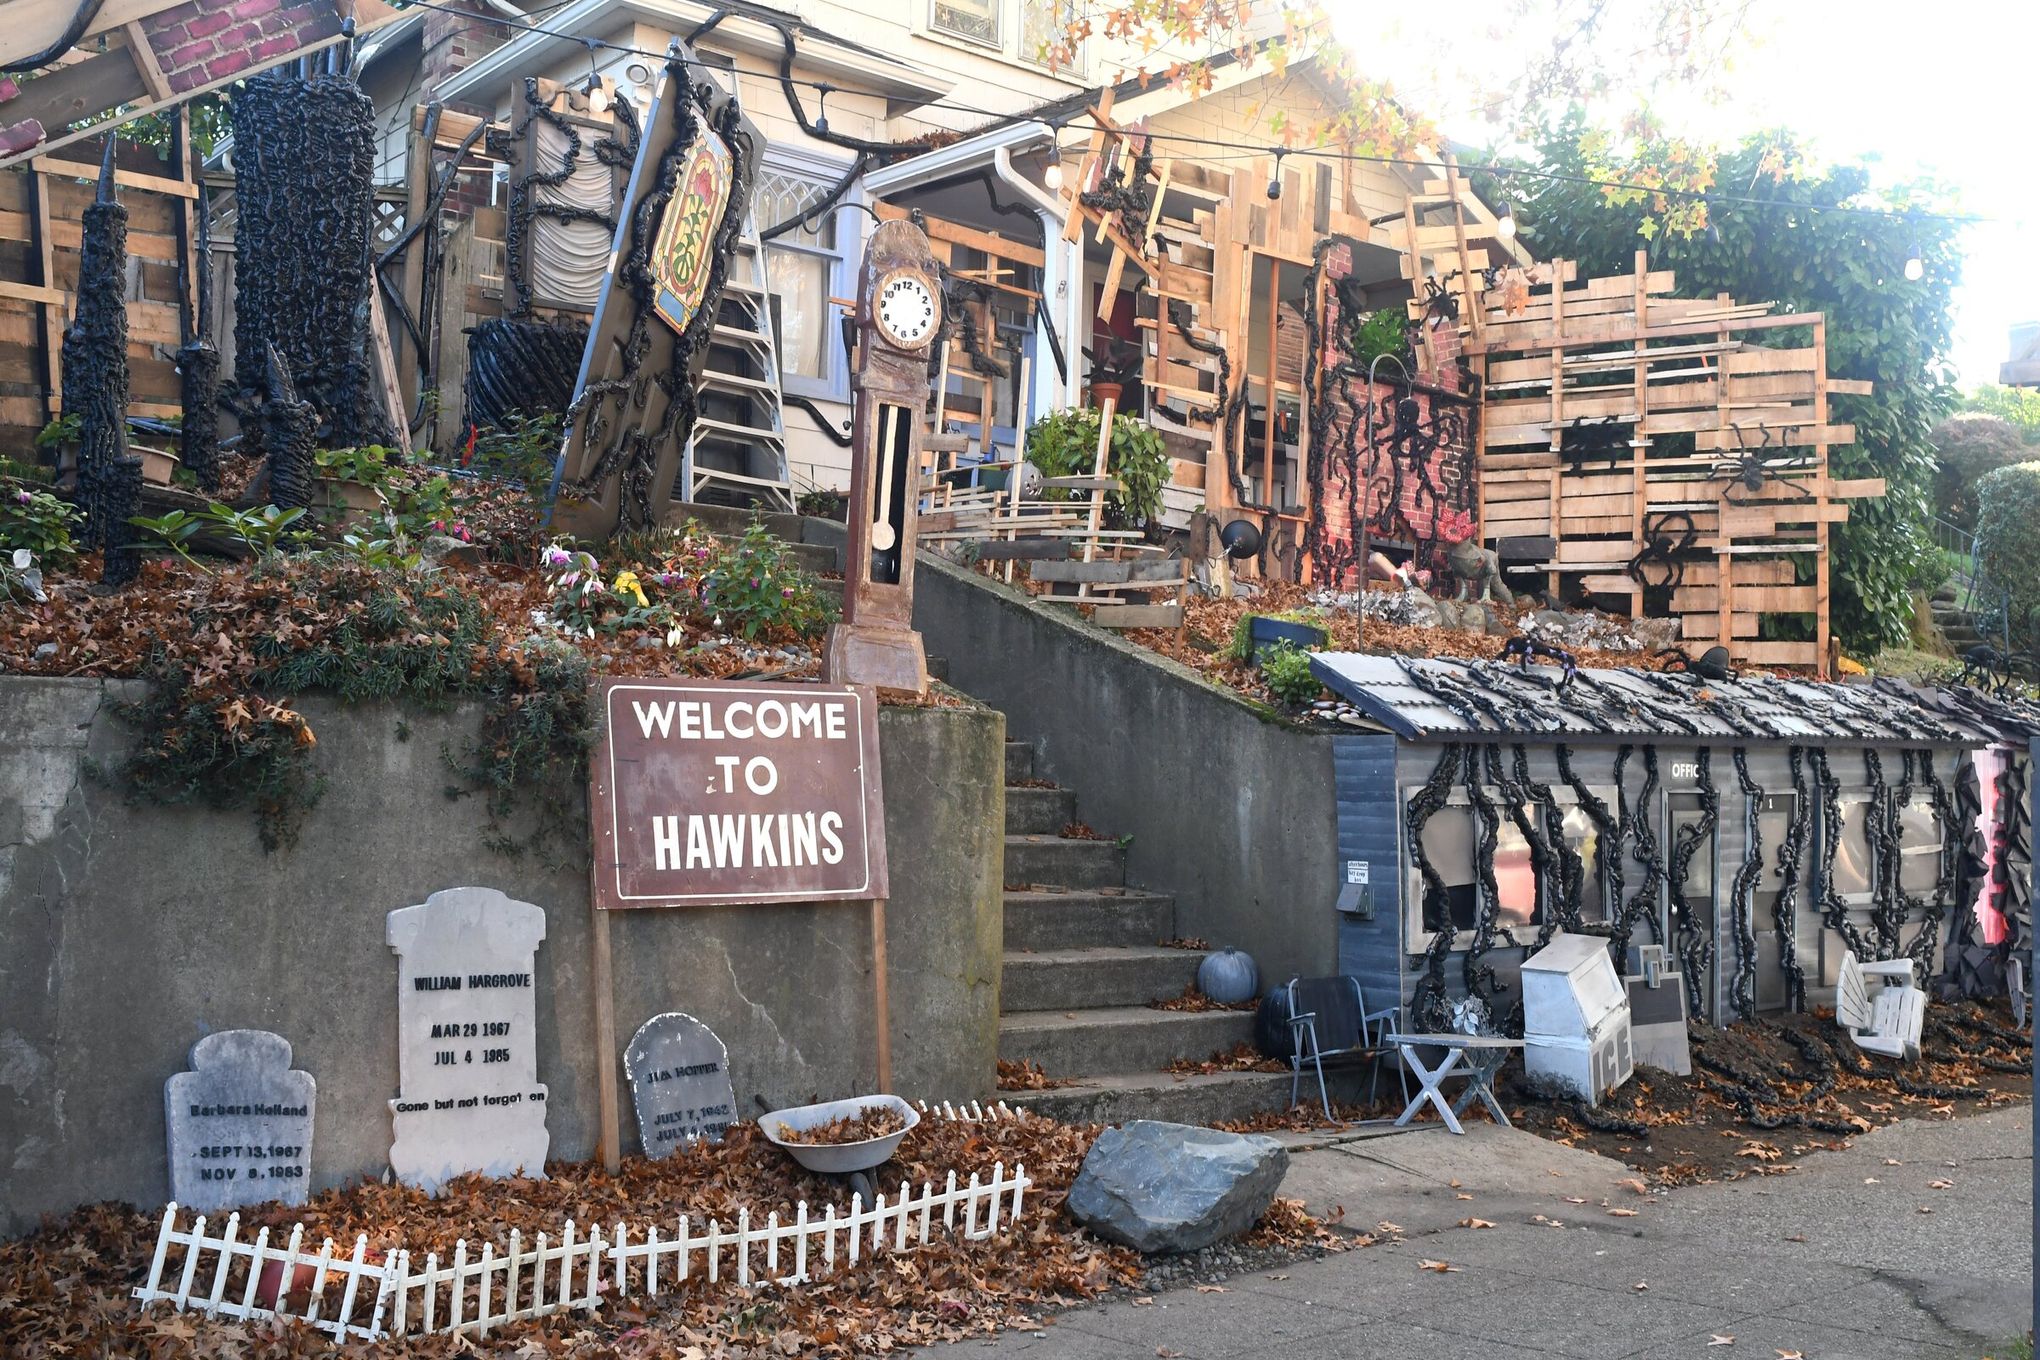 Seattle 'Stranger Things' house shows off next-level Halloween